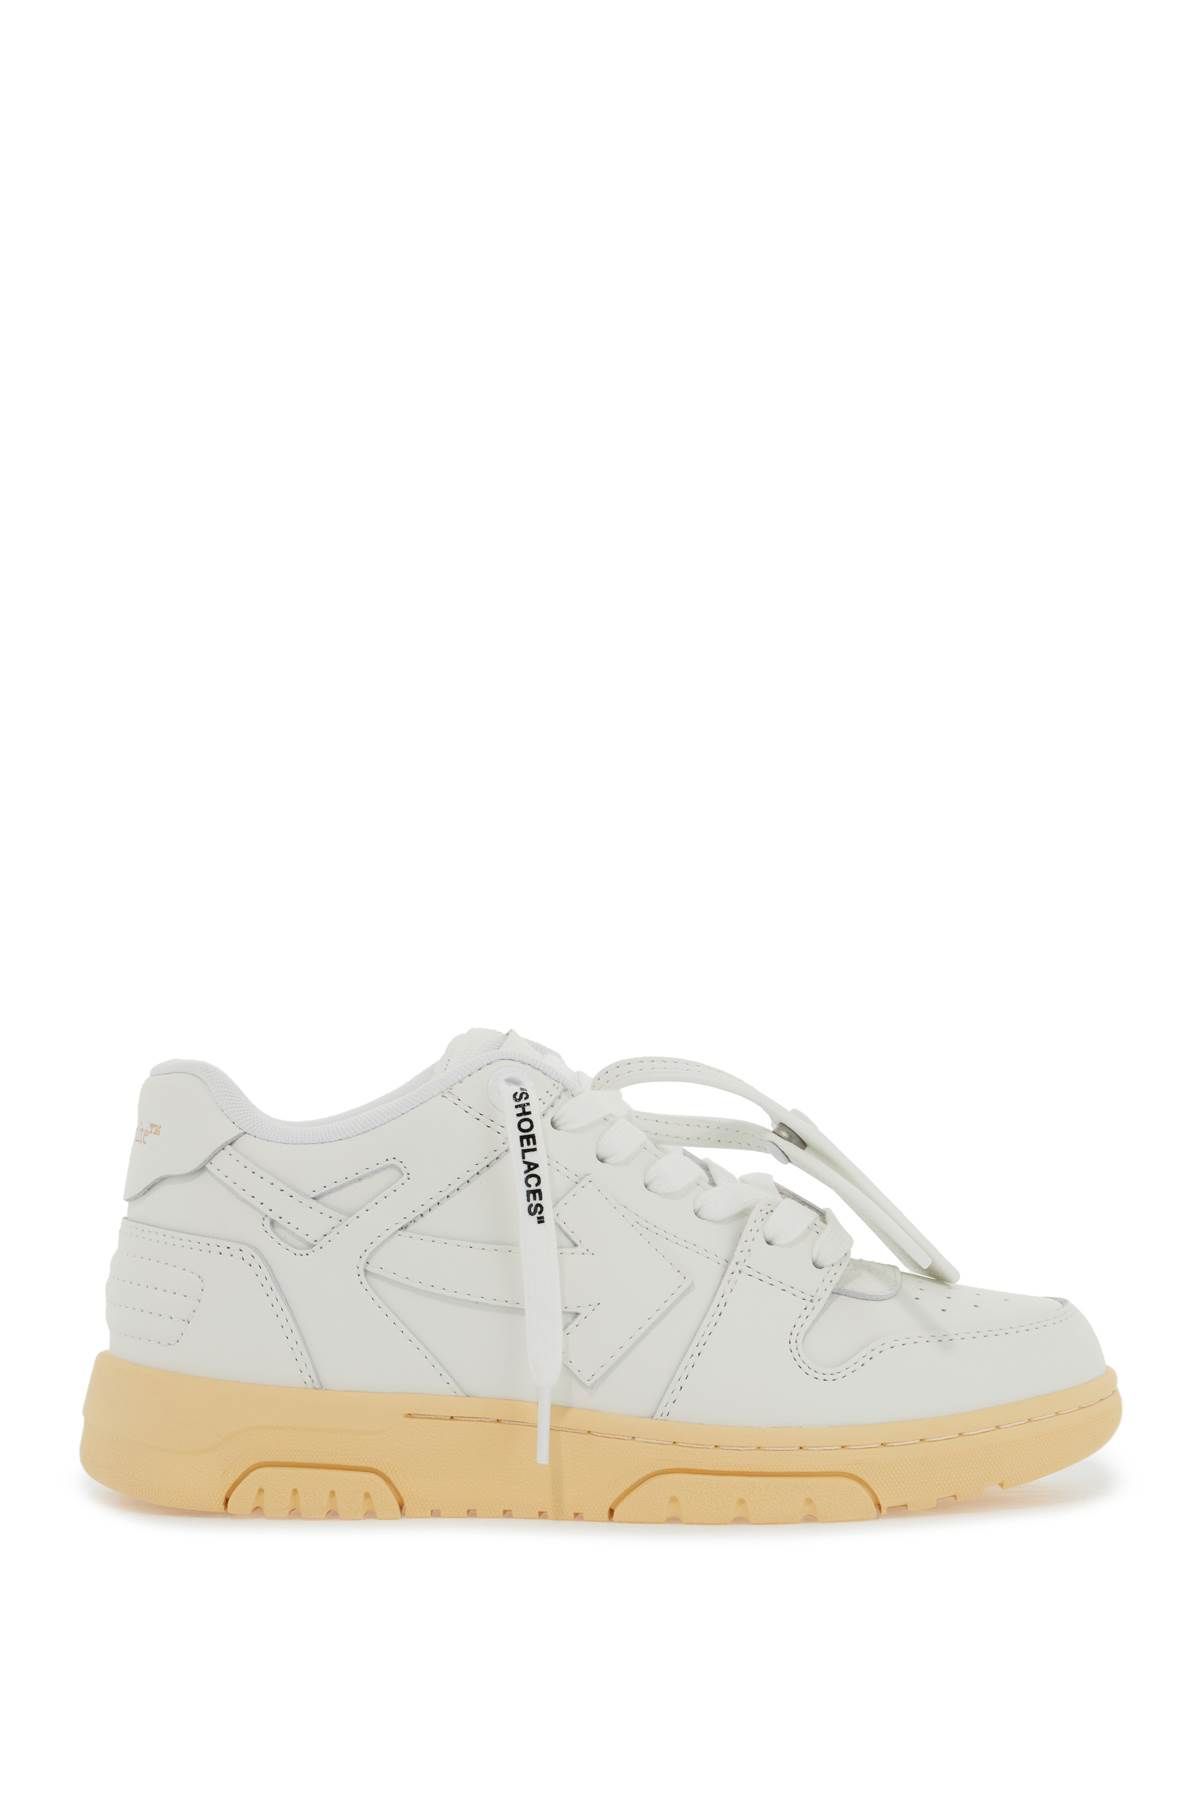 OFF-WHITE OFF-WHITE "out of office sneakers